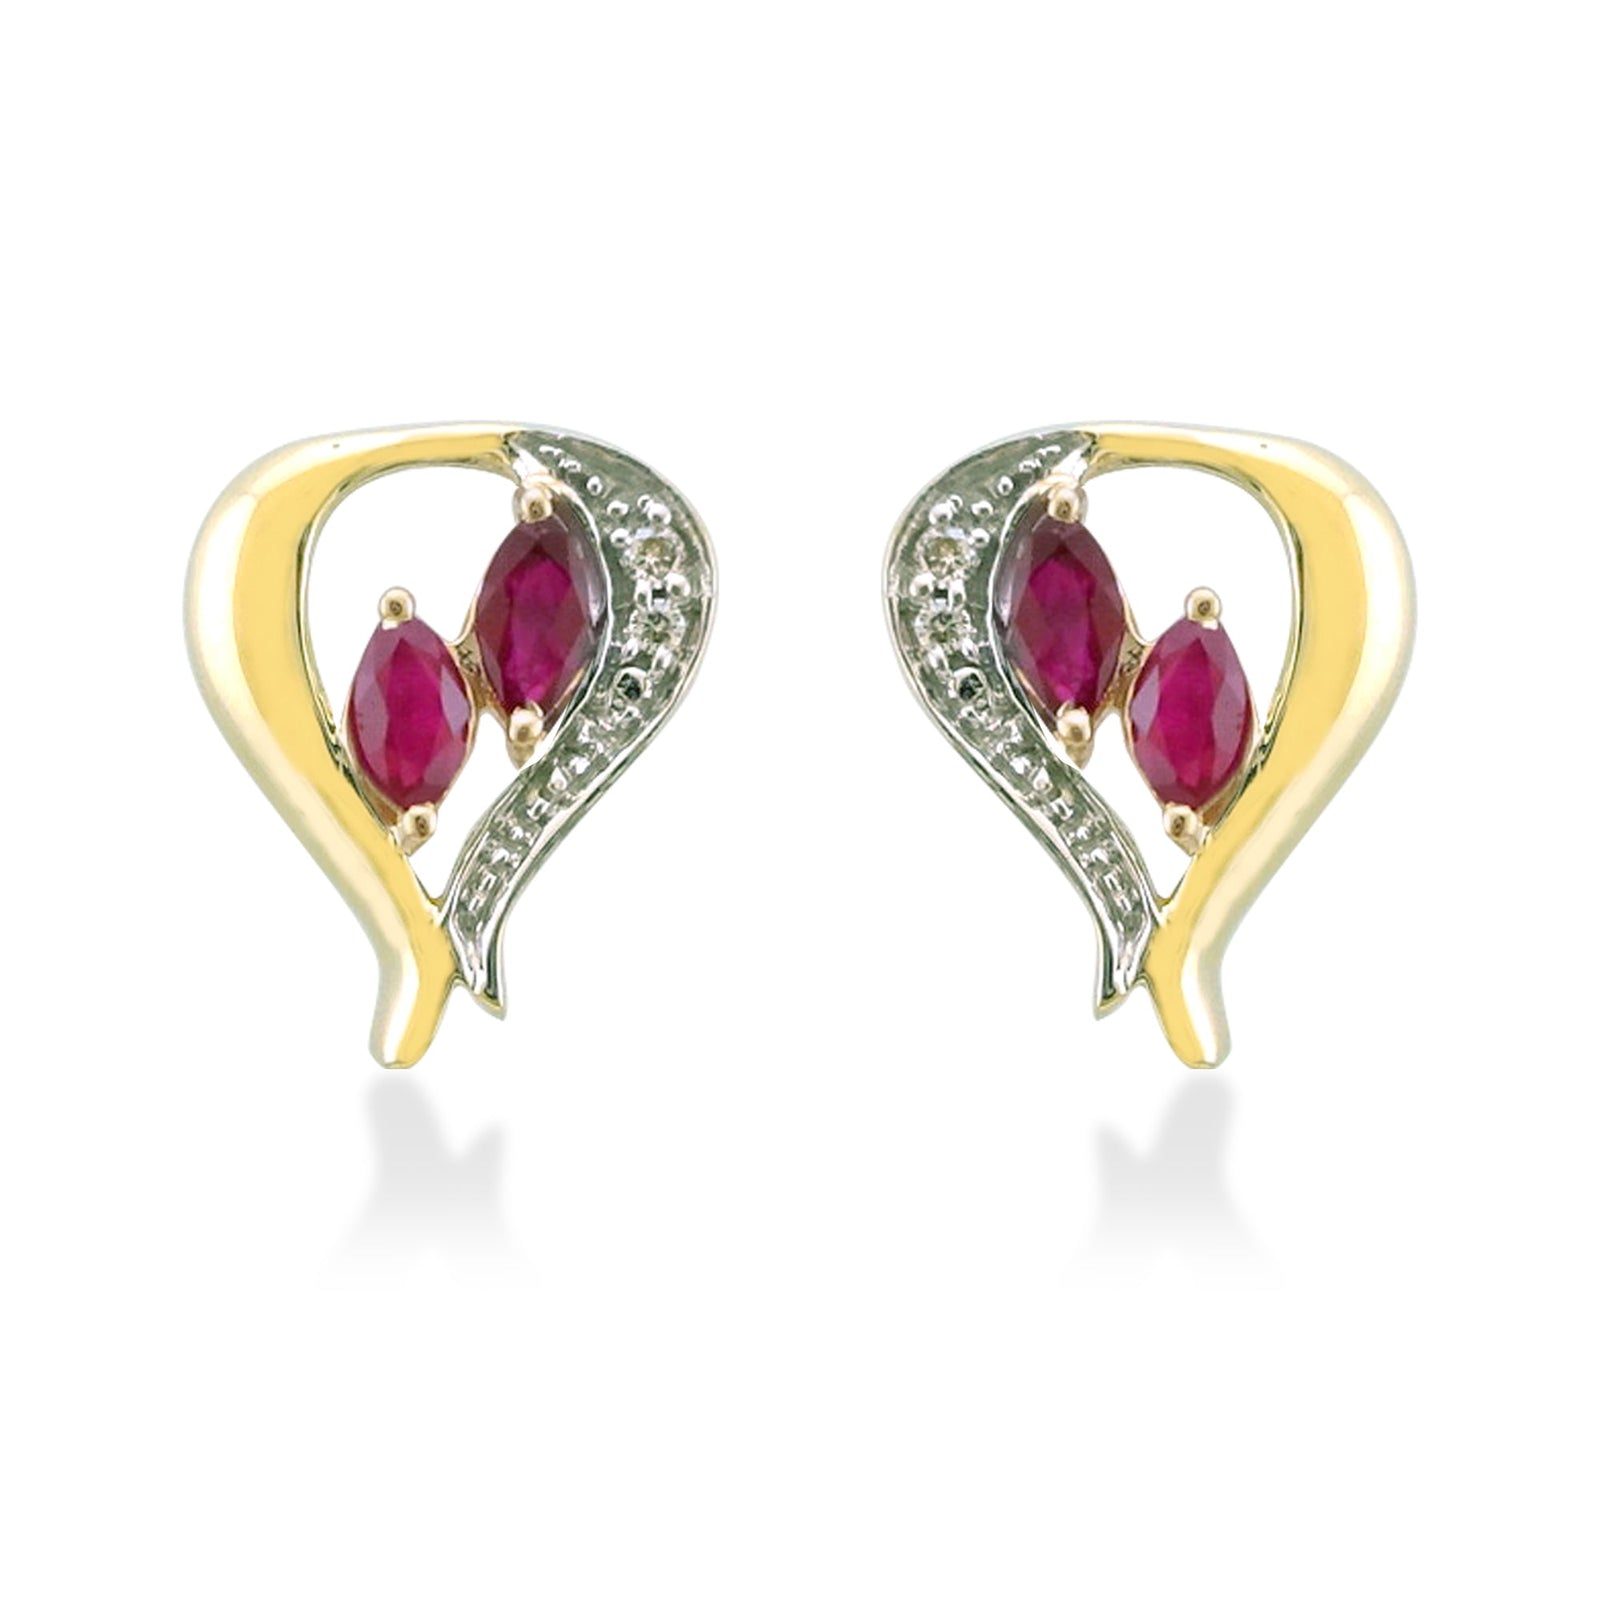 9ct gold marquise shape ruby & diamond heart stud earrings 0.03ct (product width 10mm)